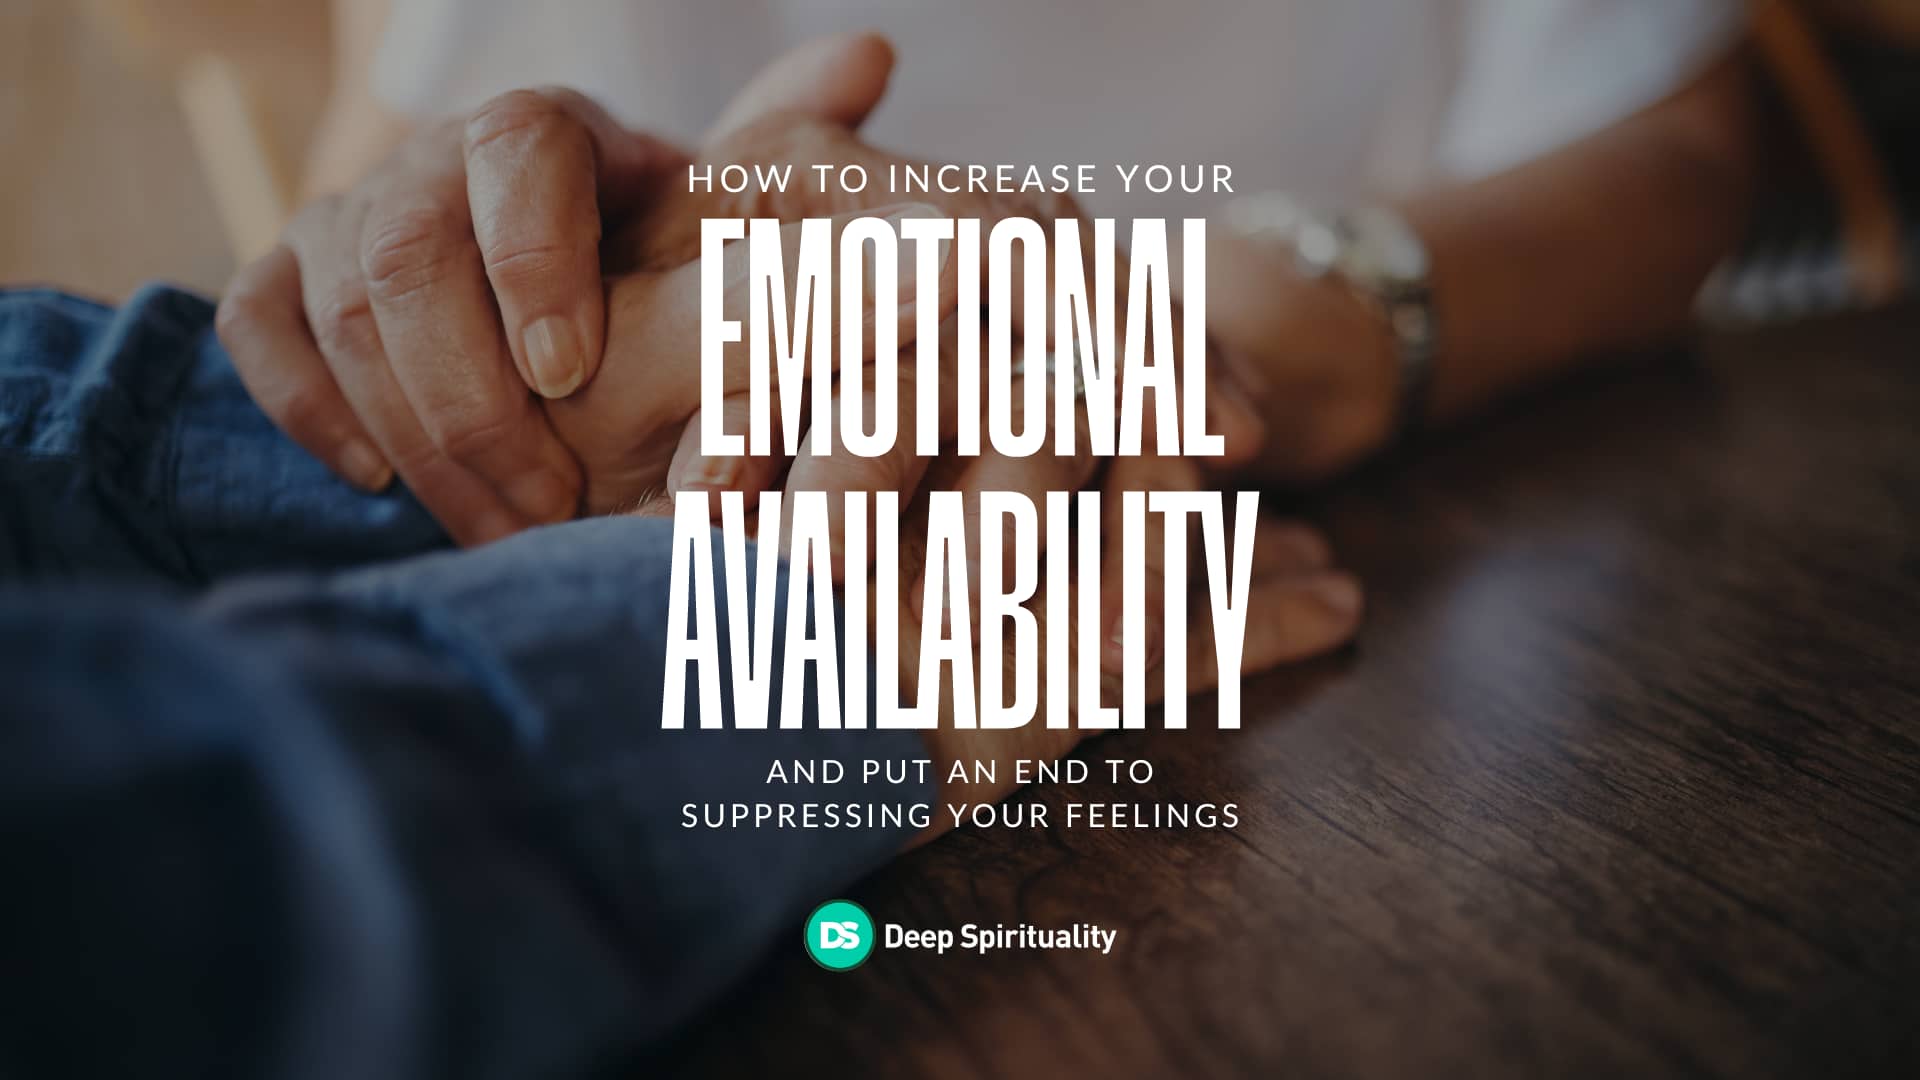 How to Increase Your Emotional Availability and Put an End to Suppressing Your Feelings 9